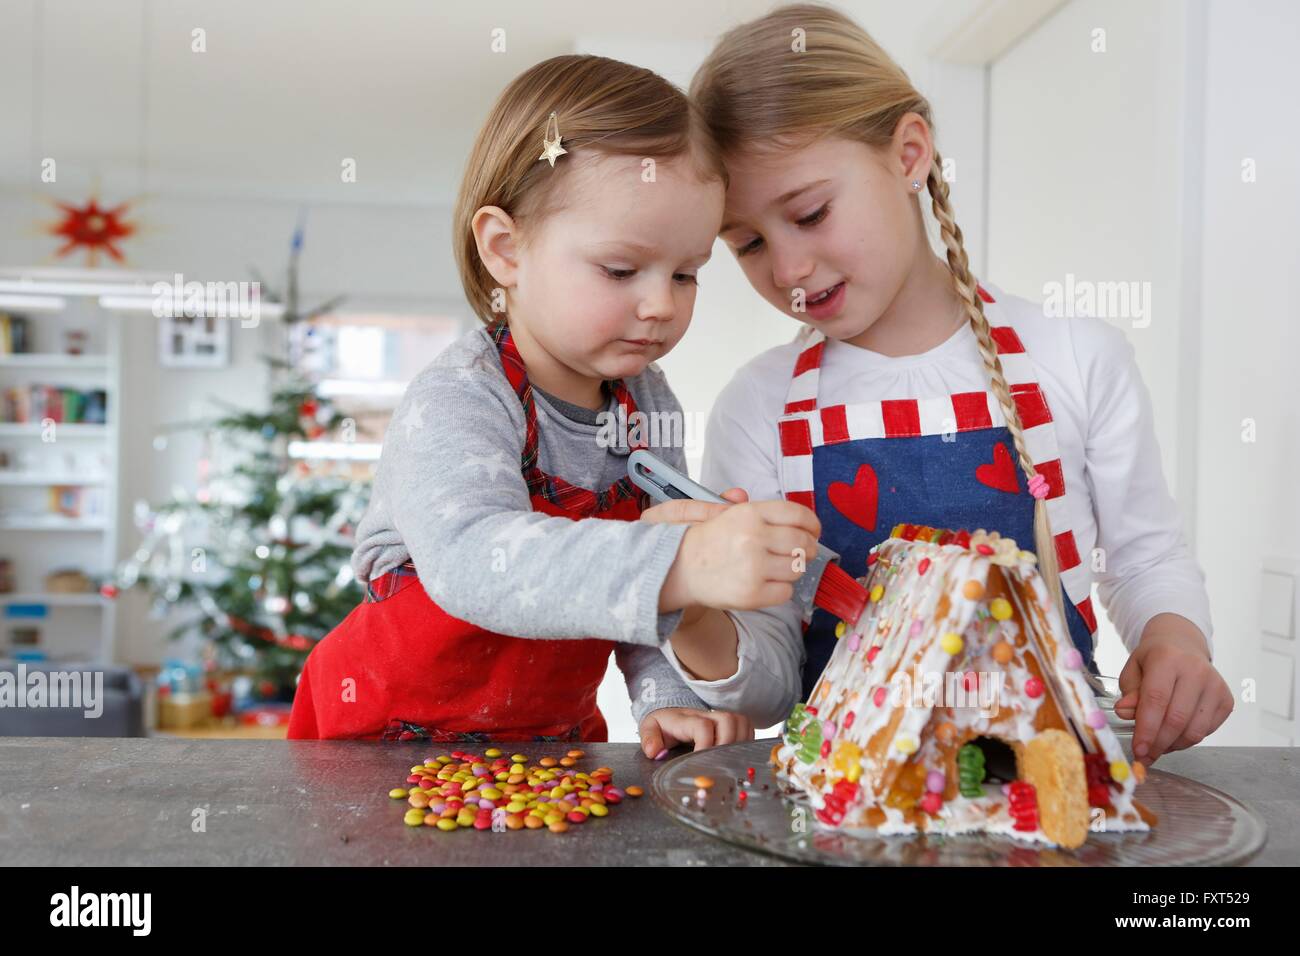 Girls at kitchen counter decorating gingerbread house together Stock Photo